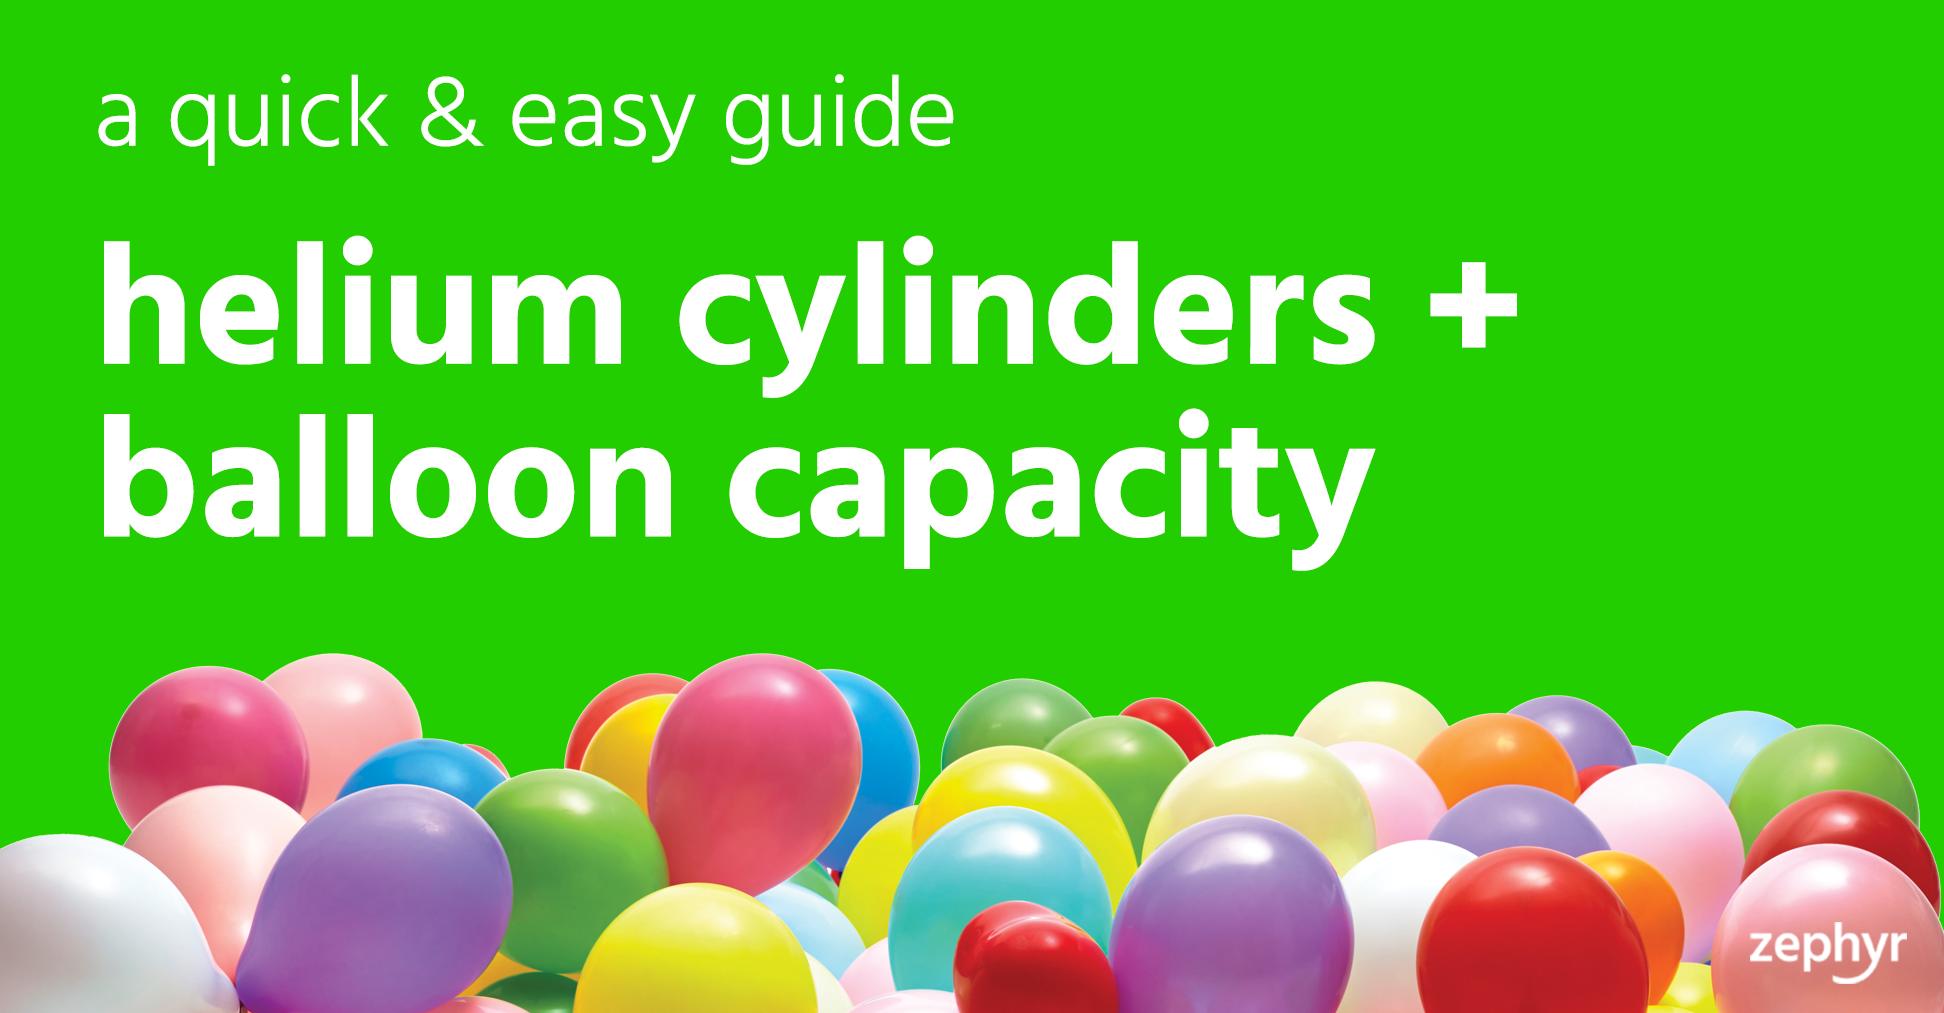 Helium cylinders & balloon capacity: A quick & easy guide